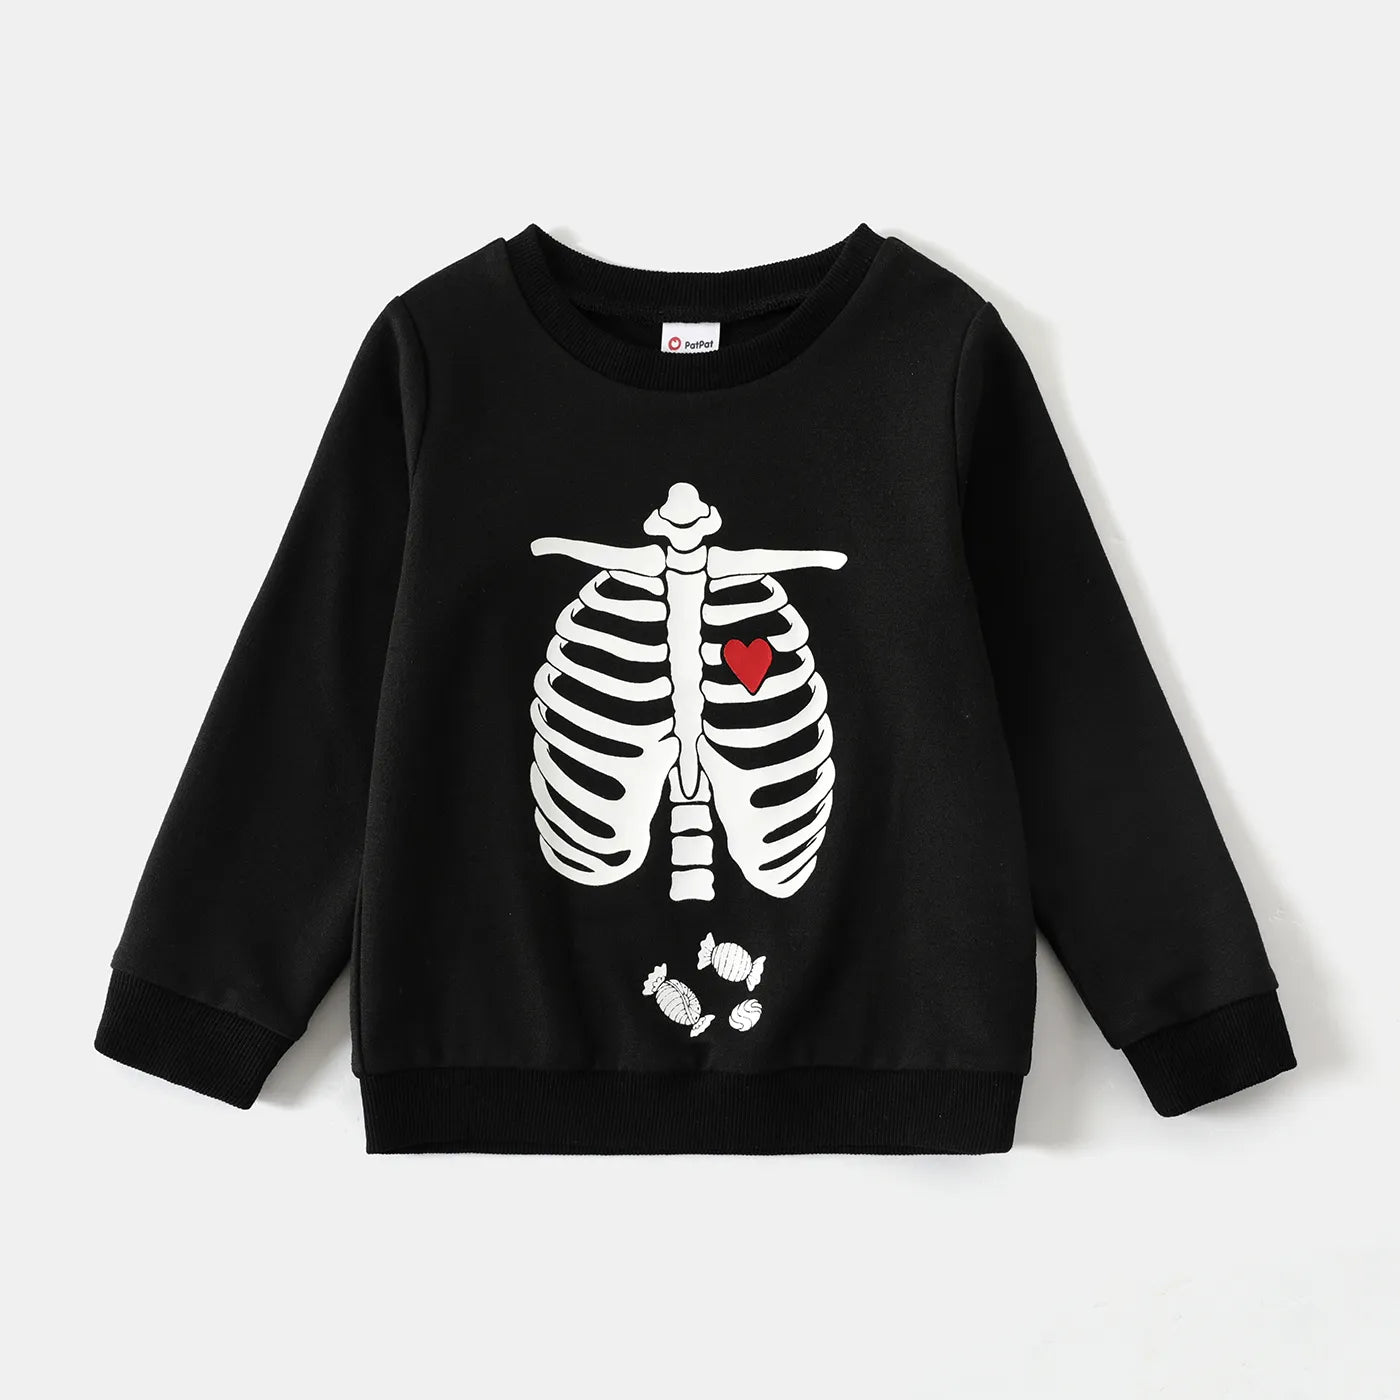 The Children's Place Glow in the Dark Boys Skeleton Long Sleeve